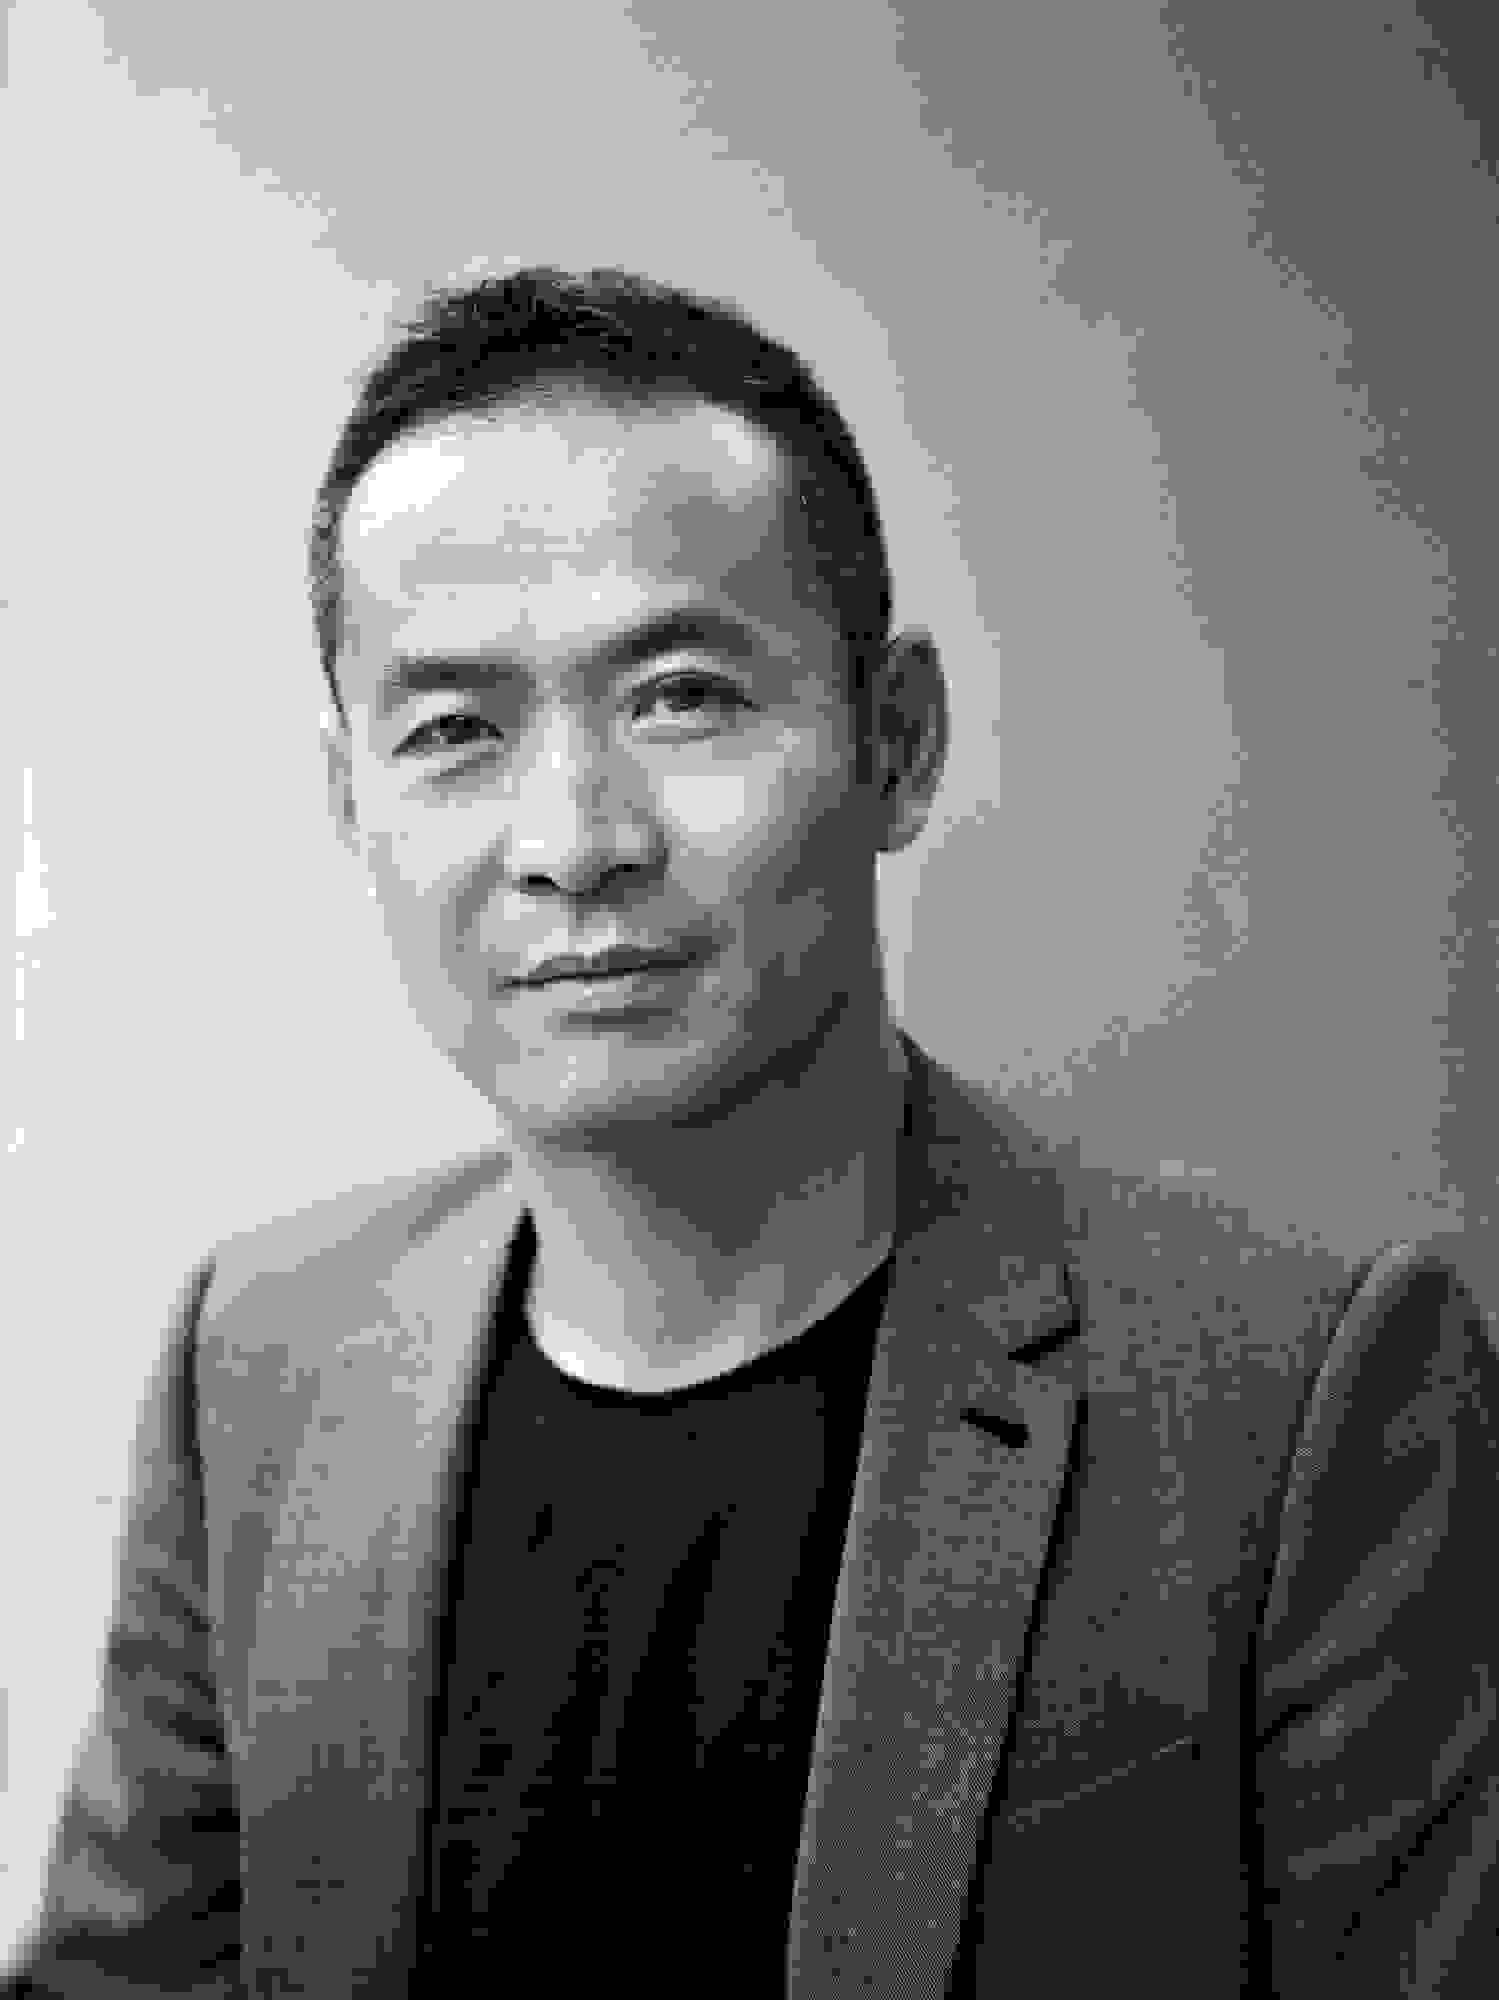 A black and white photograph of curator, ZHANG Ga. Zhang is an asian male wearing a black t-shirt and a suit jacket.